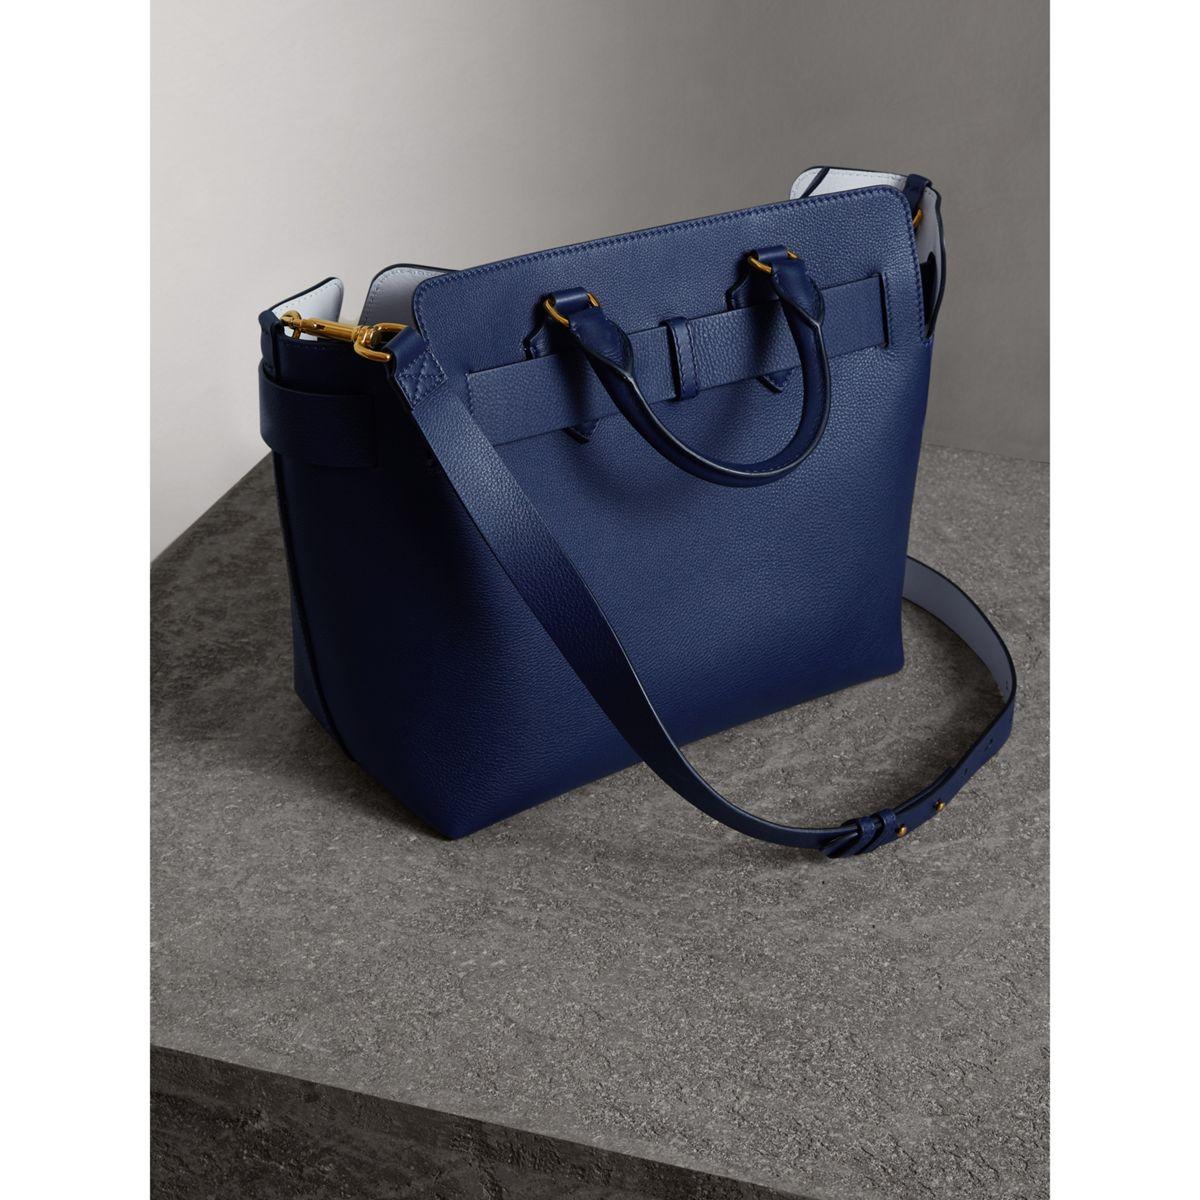 Burberry Navy Blue Leather Small Belt Tote Burberry